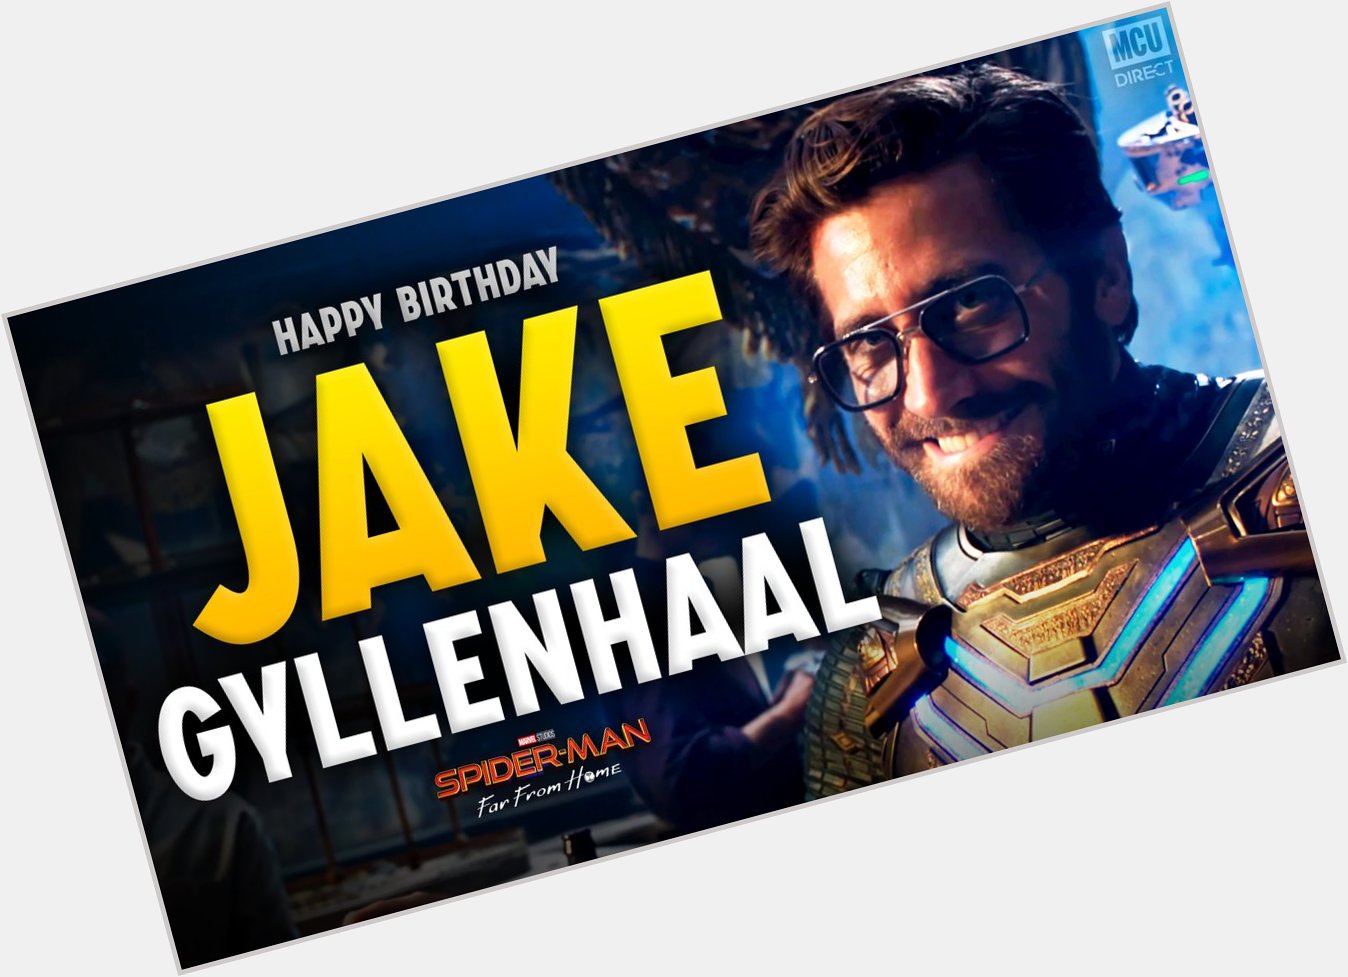 Wishing a very happy 39th birthday to the MCU\s Mysterio, actor Jake Gyllenhaal! 